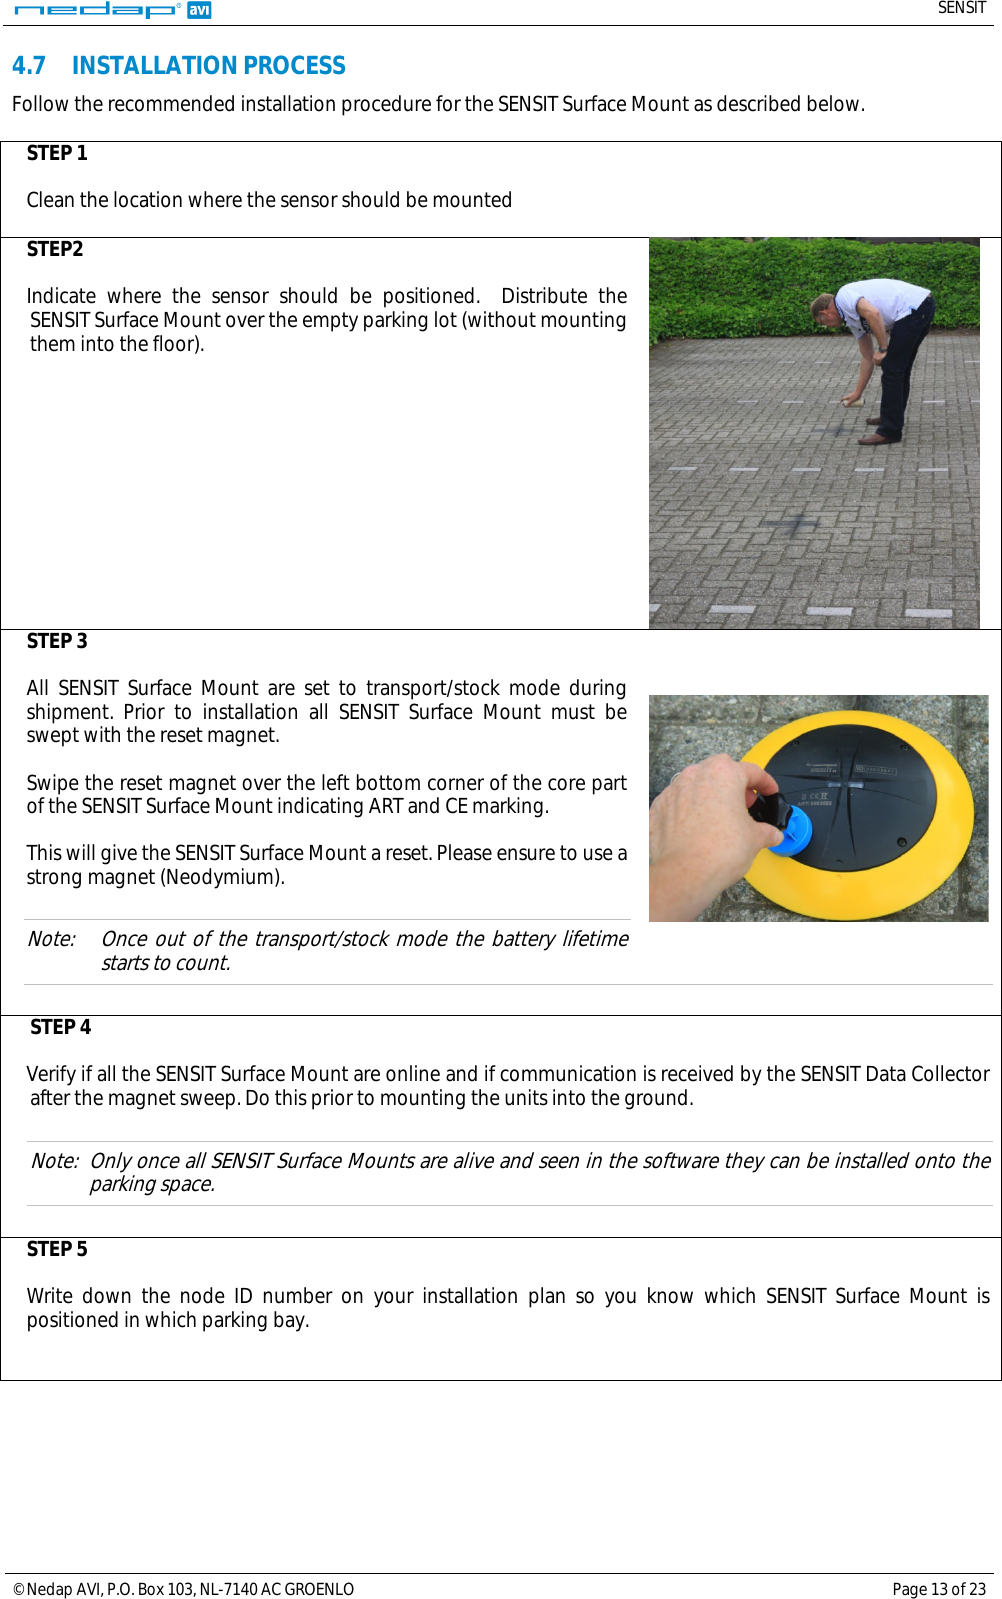   SENSIT  © Nedap AVI, P.O. Box 103, NL-7140 AC GROENLO Page 13 of 23  4.7 INSTALLATION PROCESS Follow the recommended installation procedure for the SENSIT Surface Mount as described below.  STEP 1  Clean the location where the sensor should be mounted  STEP2  Indicate where the sensor should be positioned.  Distribute the SENSIT Surface Mount over the empty parking lot (without mounting them into the floor).    STEP 3  All SENSIT Surface Mount are set to transport/stock mode during shipment. Prior to installation all SENSIT Surface Mount must be swept with the reset magnet.   Swipe the reset magnet over the left bottom corner of the core part of the SENSIT Surface Mount indicating ART and CE marking.   This will give the SENSIT Surface Mount a reset. Please ensure to use a strong magnet (Neodymium).  Note: Once out of the transport/stock mode the battery lifetime starts to count.   STEP 4  Verify if all the SENSIT Surface Mount are online and if communication is received by the SENSIT Data Collector after the magnet sweep. Do this prior to mounting the units into the ground.  Note: Only once all SENSIT Surface Mounts are alive and seen in the software they can be installed onto the parking space.  STEP 5  Write down the node ID number on your installation plan so you know which SENSIT Surface Mount is positioned in which parking bay.       